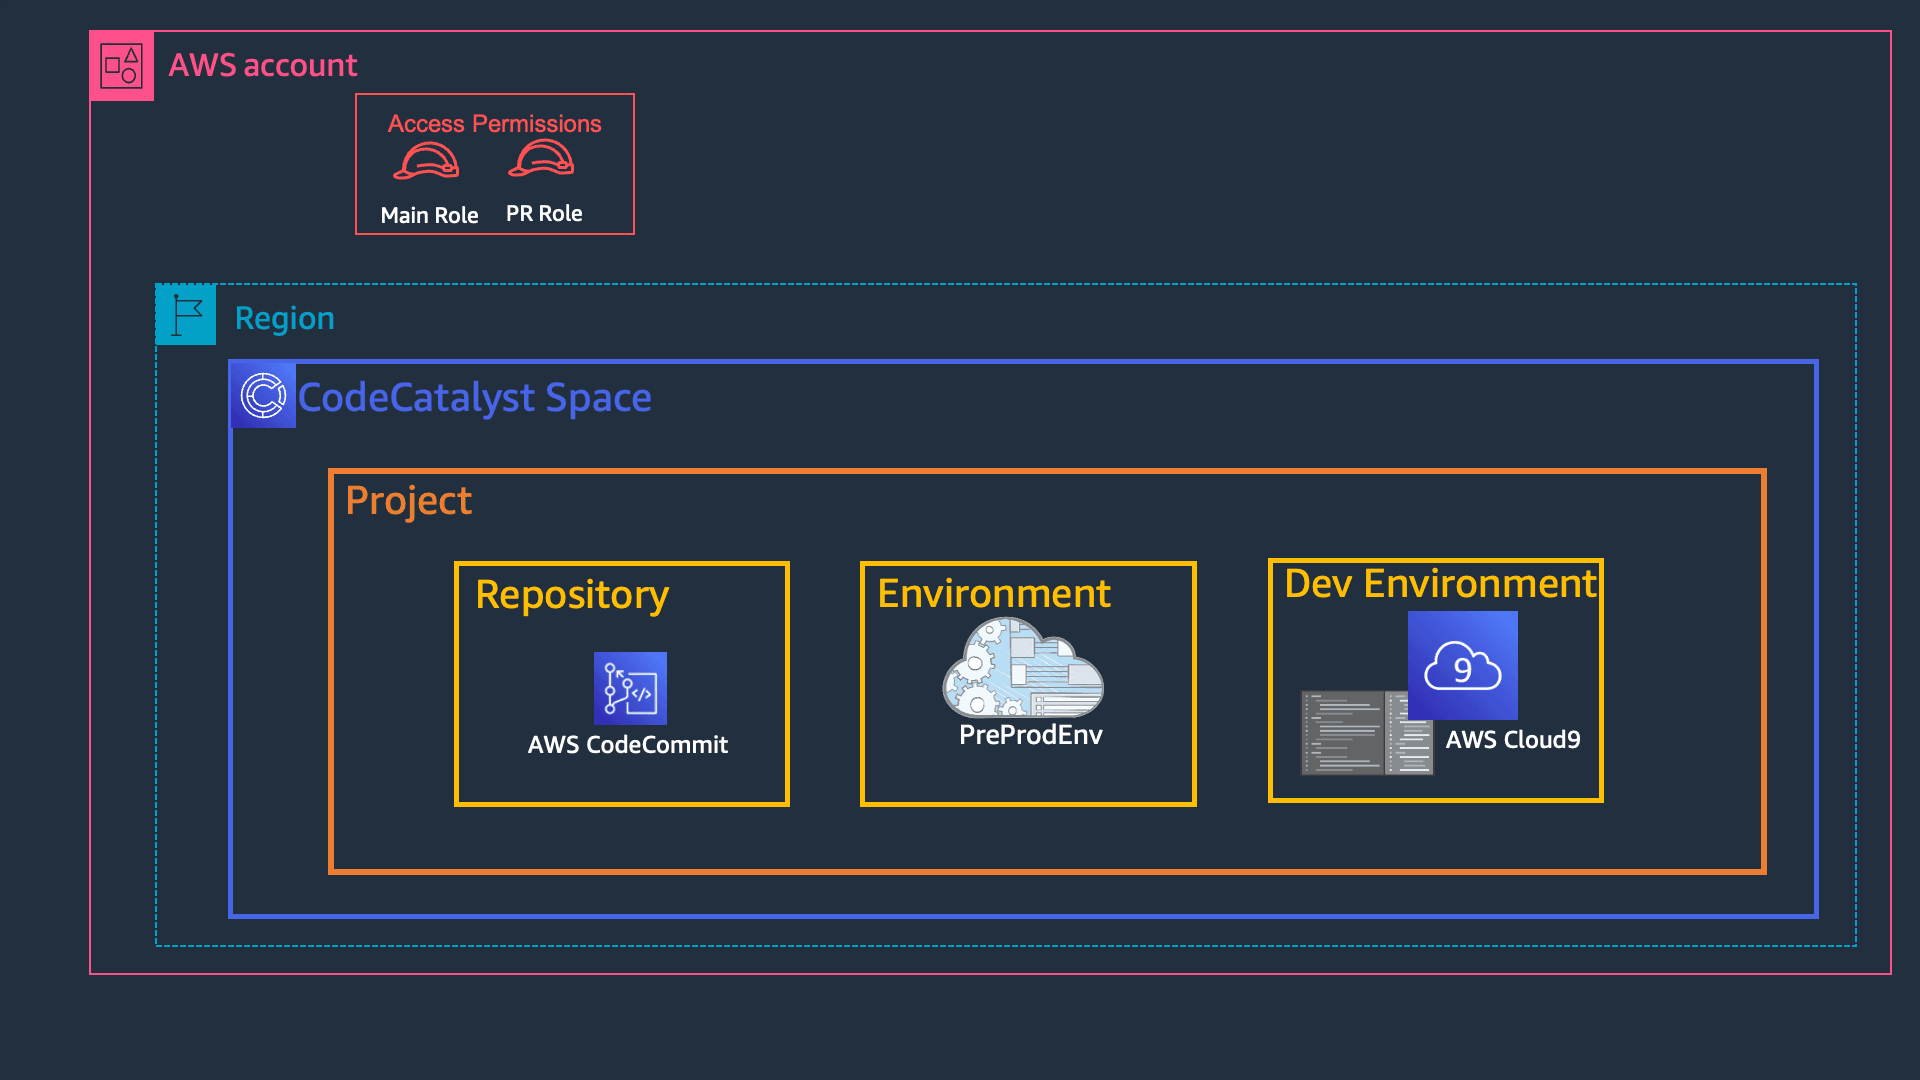 Setting up a CodeCatalyst Space, Project, Repo,  Environment inside AWS account